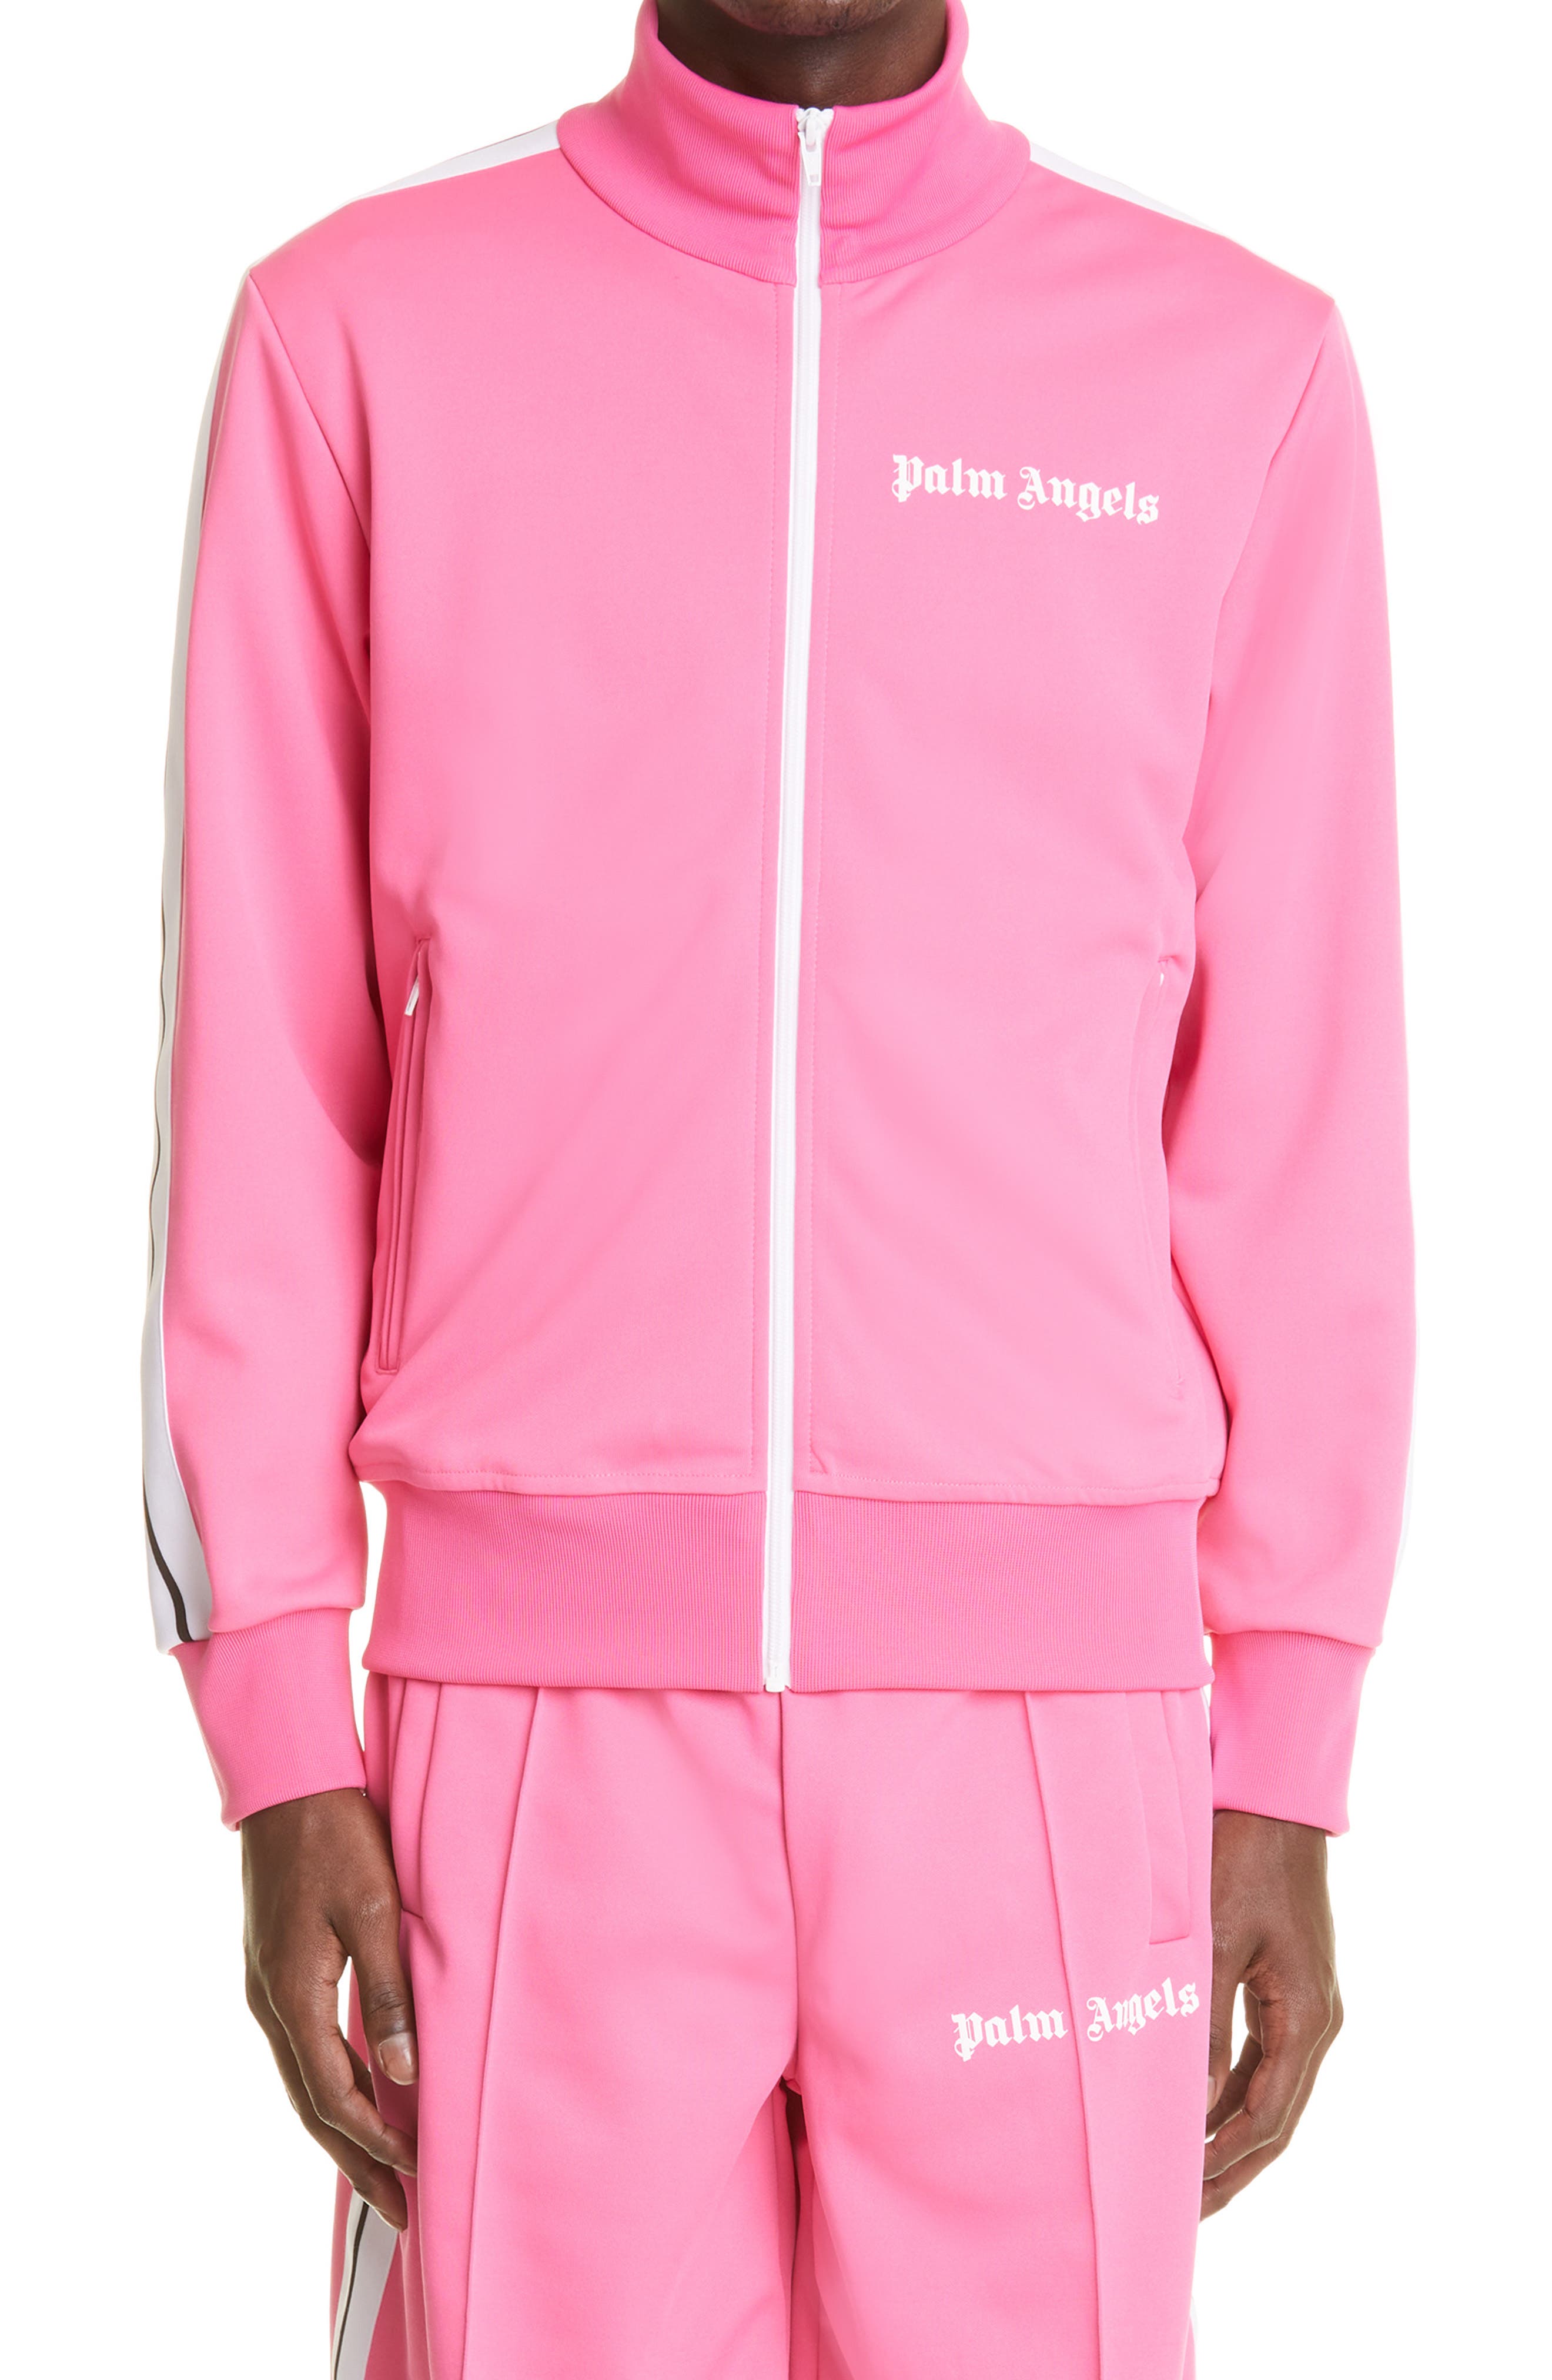 Palm Angels Classic Logo Track Jacket in Fuchsia White at Nordstrom, Size Small